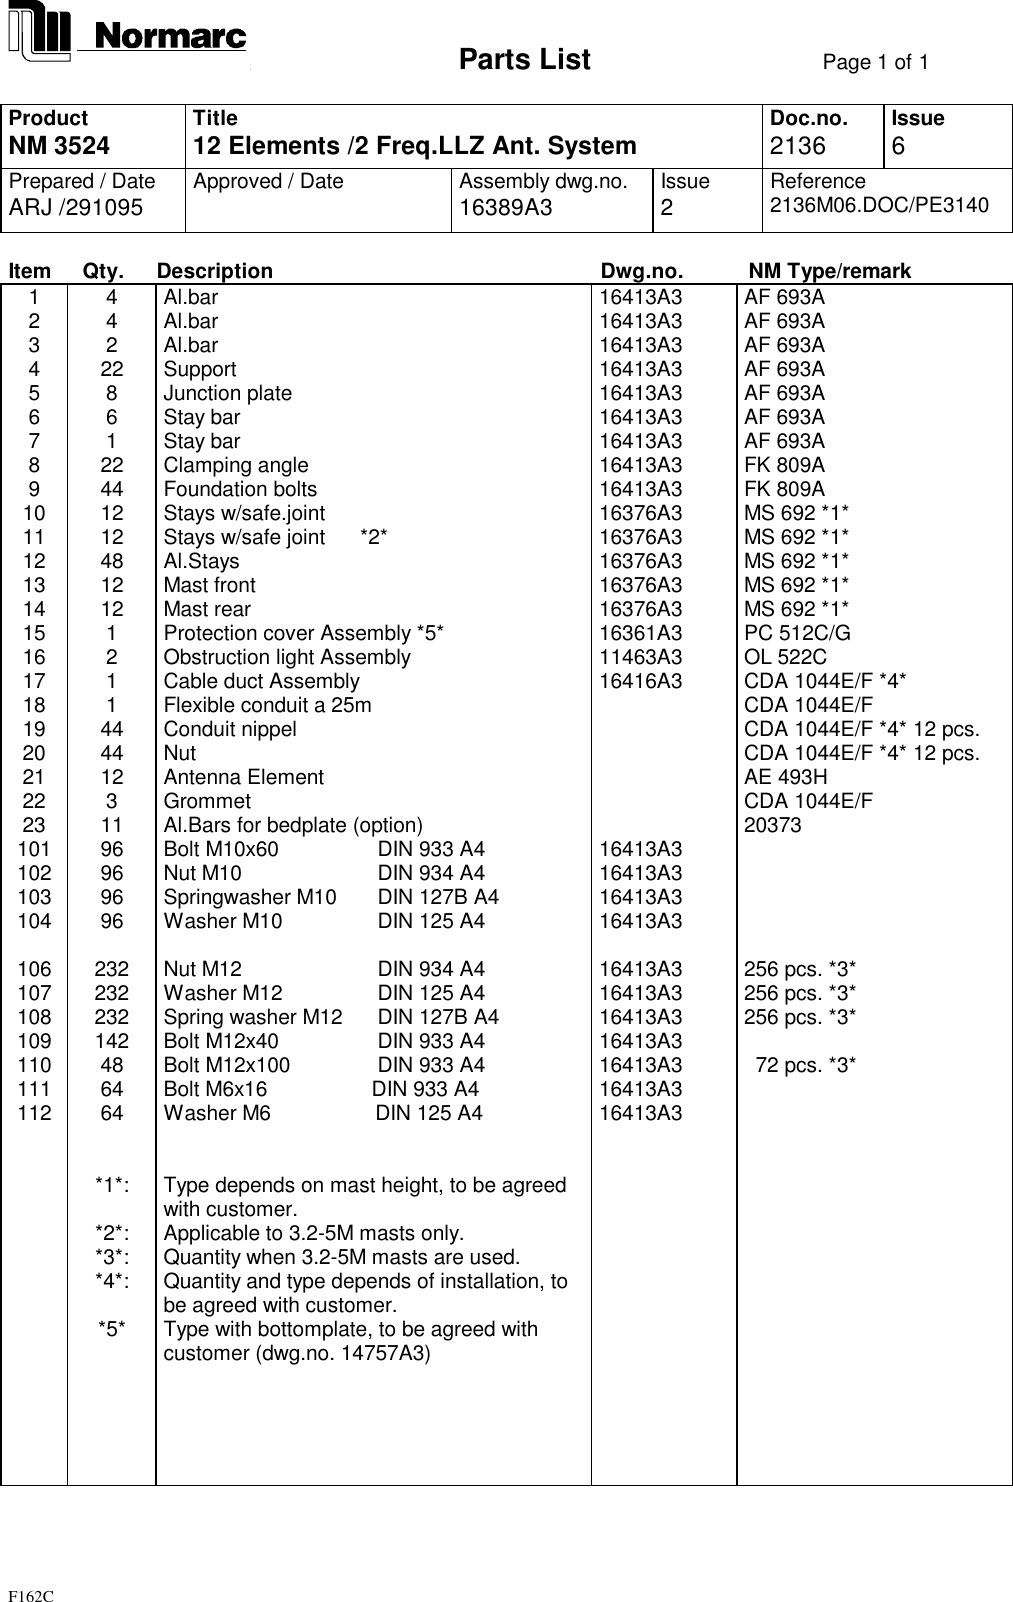                             Parts List Page 1 of 1F162CProductNM 3524 Title12 Elements /2 Freq.LLZ Ant. System Doc.no.2136 Issue6Prepared / DateARJ /291095 Approved / Date Assembly dwg.no.16389A3 Issue2Reference2136M06.DOC/PE3140Item Qty. Description Dwg.no. NM Type/remark1 4 Al.bar 16413A3 AF 693A2 4 Al.bar 16413A3 AF 693A3 2 Al.bar 16413A3 AF 693A4 22 Support 16413A3 AF 693A5 8 Junction plate 16413A3 AF 693A6 6 Stay bar 16413A3 AF 693A7 1 Stay bar 16413A3 AF 693A8 22 Clamping angle 16413A3 FK 809A9 44 Foundation bolts 16413A3 FK 809A10 12 Stays w/safe.joint 16376A3 MS 692 *1*11 12 Stays w/safe joint      *2* 16376A3 MS 692 *1*12 48 Al.Stays 16376A3 MS 692 *1*13 12 Mast front 16376A3 MS 692 *1*14 12 Mast rear 16376A3 MS 692 *1*15 1 Protection cover Assembly *5* 16361A3 PC 512C/G16 2 Obstruction light Assembly 11463A3 OL 522C17 1 Cable duct Assembly 16416A3 CDA 1044E/F *4*18 1 Flexible conduit a 25m CDA 1044E/F19 44 Conduit nippel CDA 1044E/F *4* 12 pcs.20 44 Nut CDA 1044E/F *4* 12 pcs.21 12 Antenna Element AE 493H22 3 Grommet CDA 1044E/F23 11 Al.Bars for bedplate (option) 20373101 96 Bolt M10x60     DIN 933 A4 16413A3102 96 Nut M10         DIN 934 A4 16413A3103 96 Springwasher M10    DIN 127B A4 16413A3104 96 Washer M10     DIN 125 A4 16413A3106 232 Nut M12          DIN 934 A4 16413A3 256 pcs. *3*107 232 Washer M12      DIN 125 A4 16413A3 256 pcs. *3*108 232 Spring washer M12   DIN 127B A4 16413A3 256 pcs. *3*109 142 Bolt M12x40       DIN 933 A4 16413A3110 48 Bolt M12x100     DIN 933 A4 16413A3   72 pcs. *3*111 64 Bolt M6x16                  DIN 933 A4 16413A3112 64 Washer M6                  DIN 125 A4 16413A3*1*: Type depends on mast height, to be agreedwith customer.*2*: Applicable to 3.2-5M masts only.*3*: Quantity when 3.2-5M masts are used.*4*: Quantity and type depends of installation, tobe agreed with customer.*5* Type with bottomplate, to be agreed withcustomer (dwg.no. 14757A3)